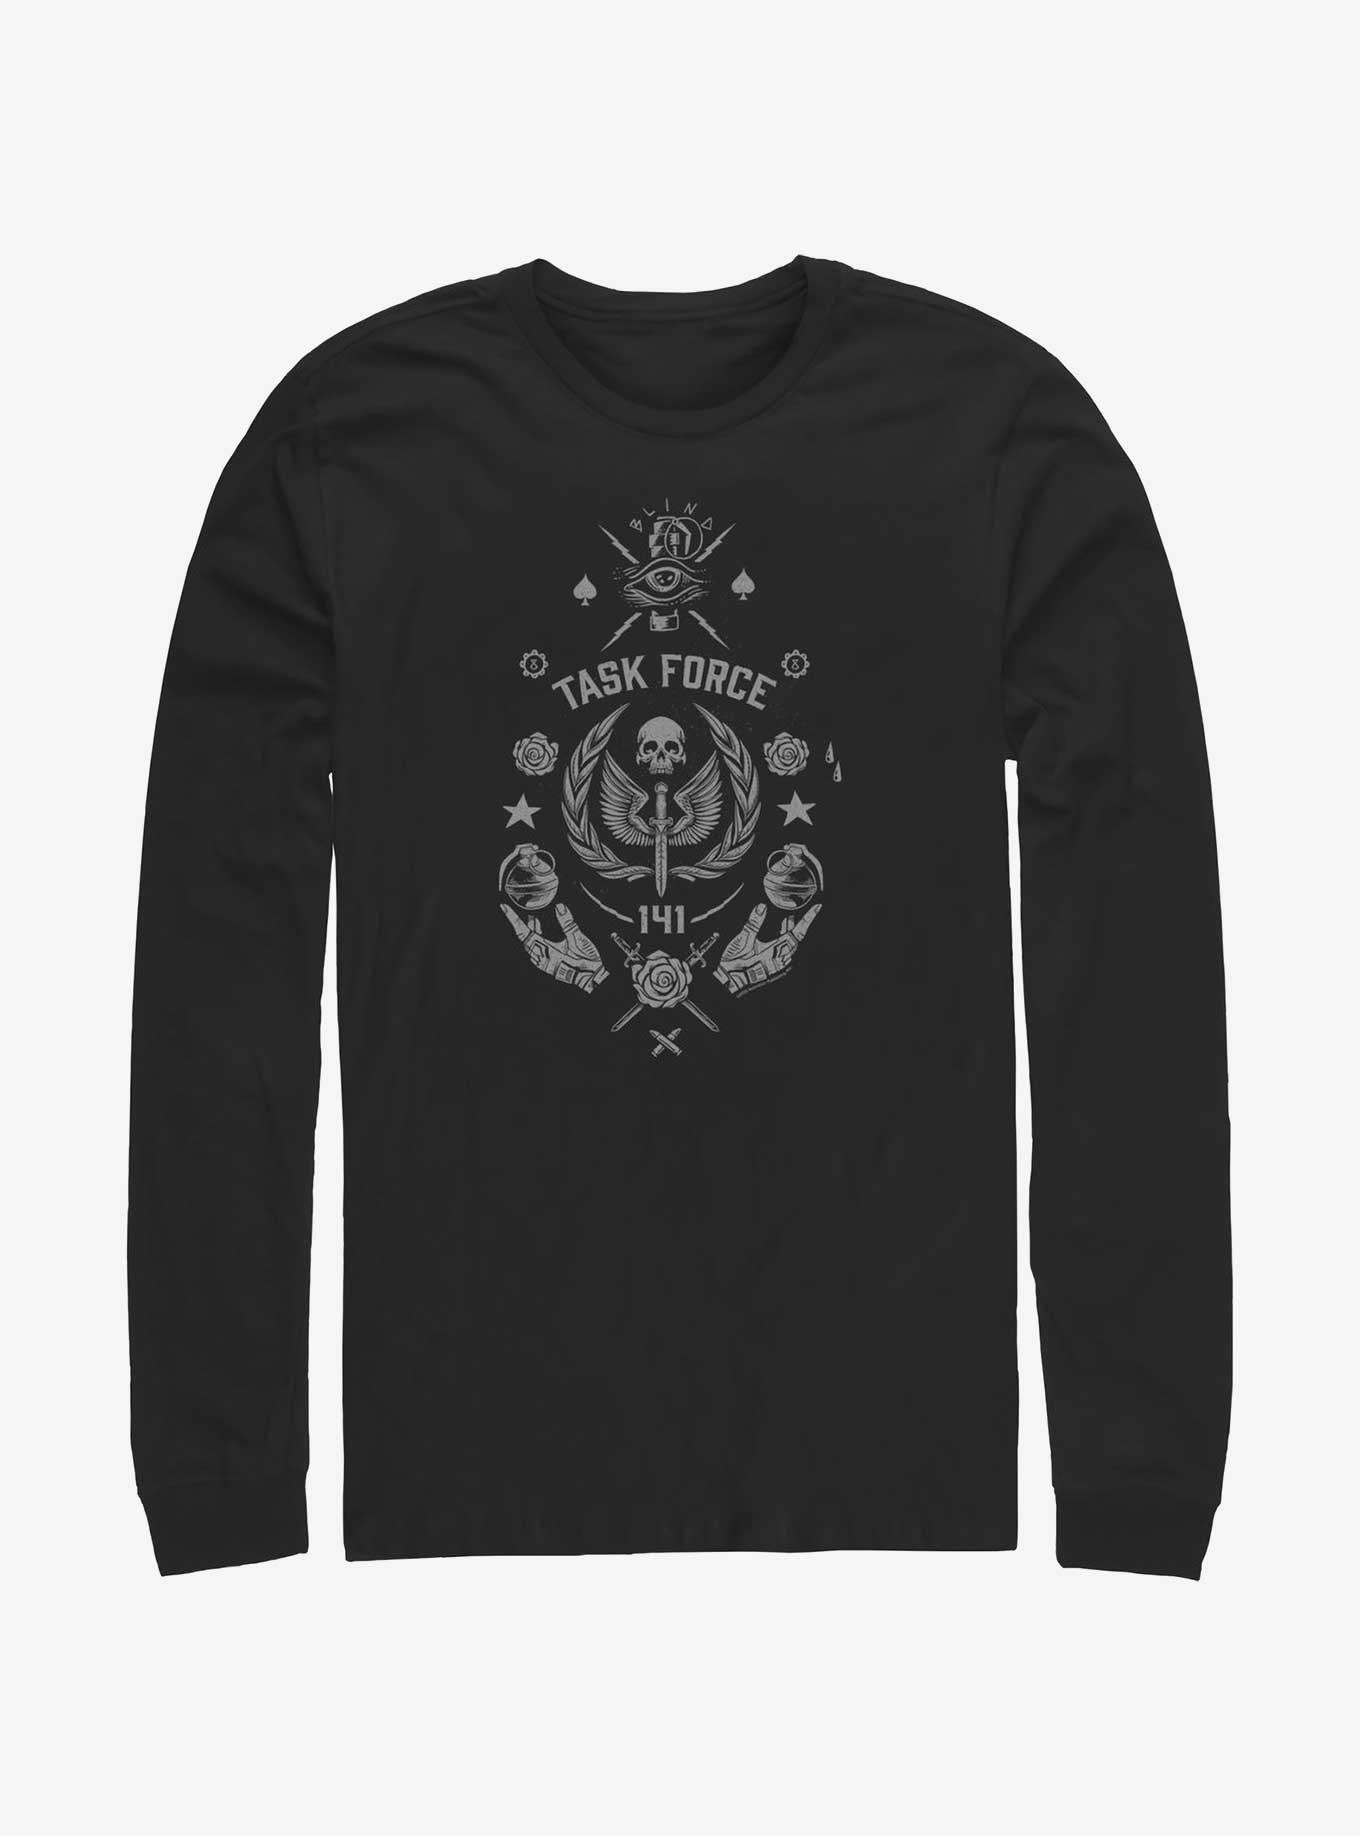 Call of Duty Task Force 141 Icon Long-Sleeve T-Shirt, BLACK, hi-res